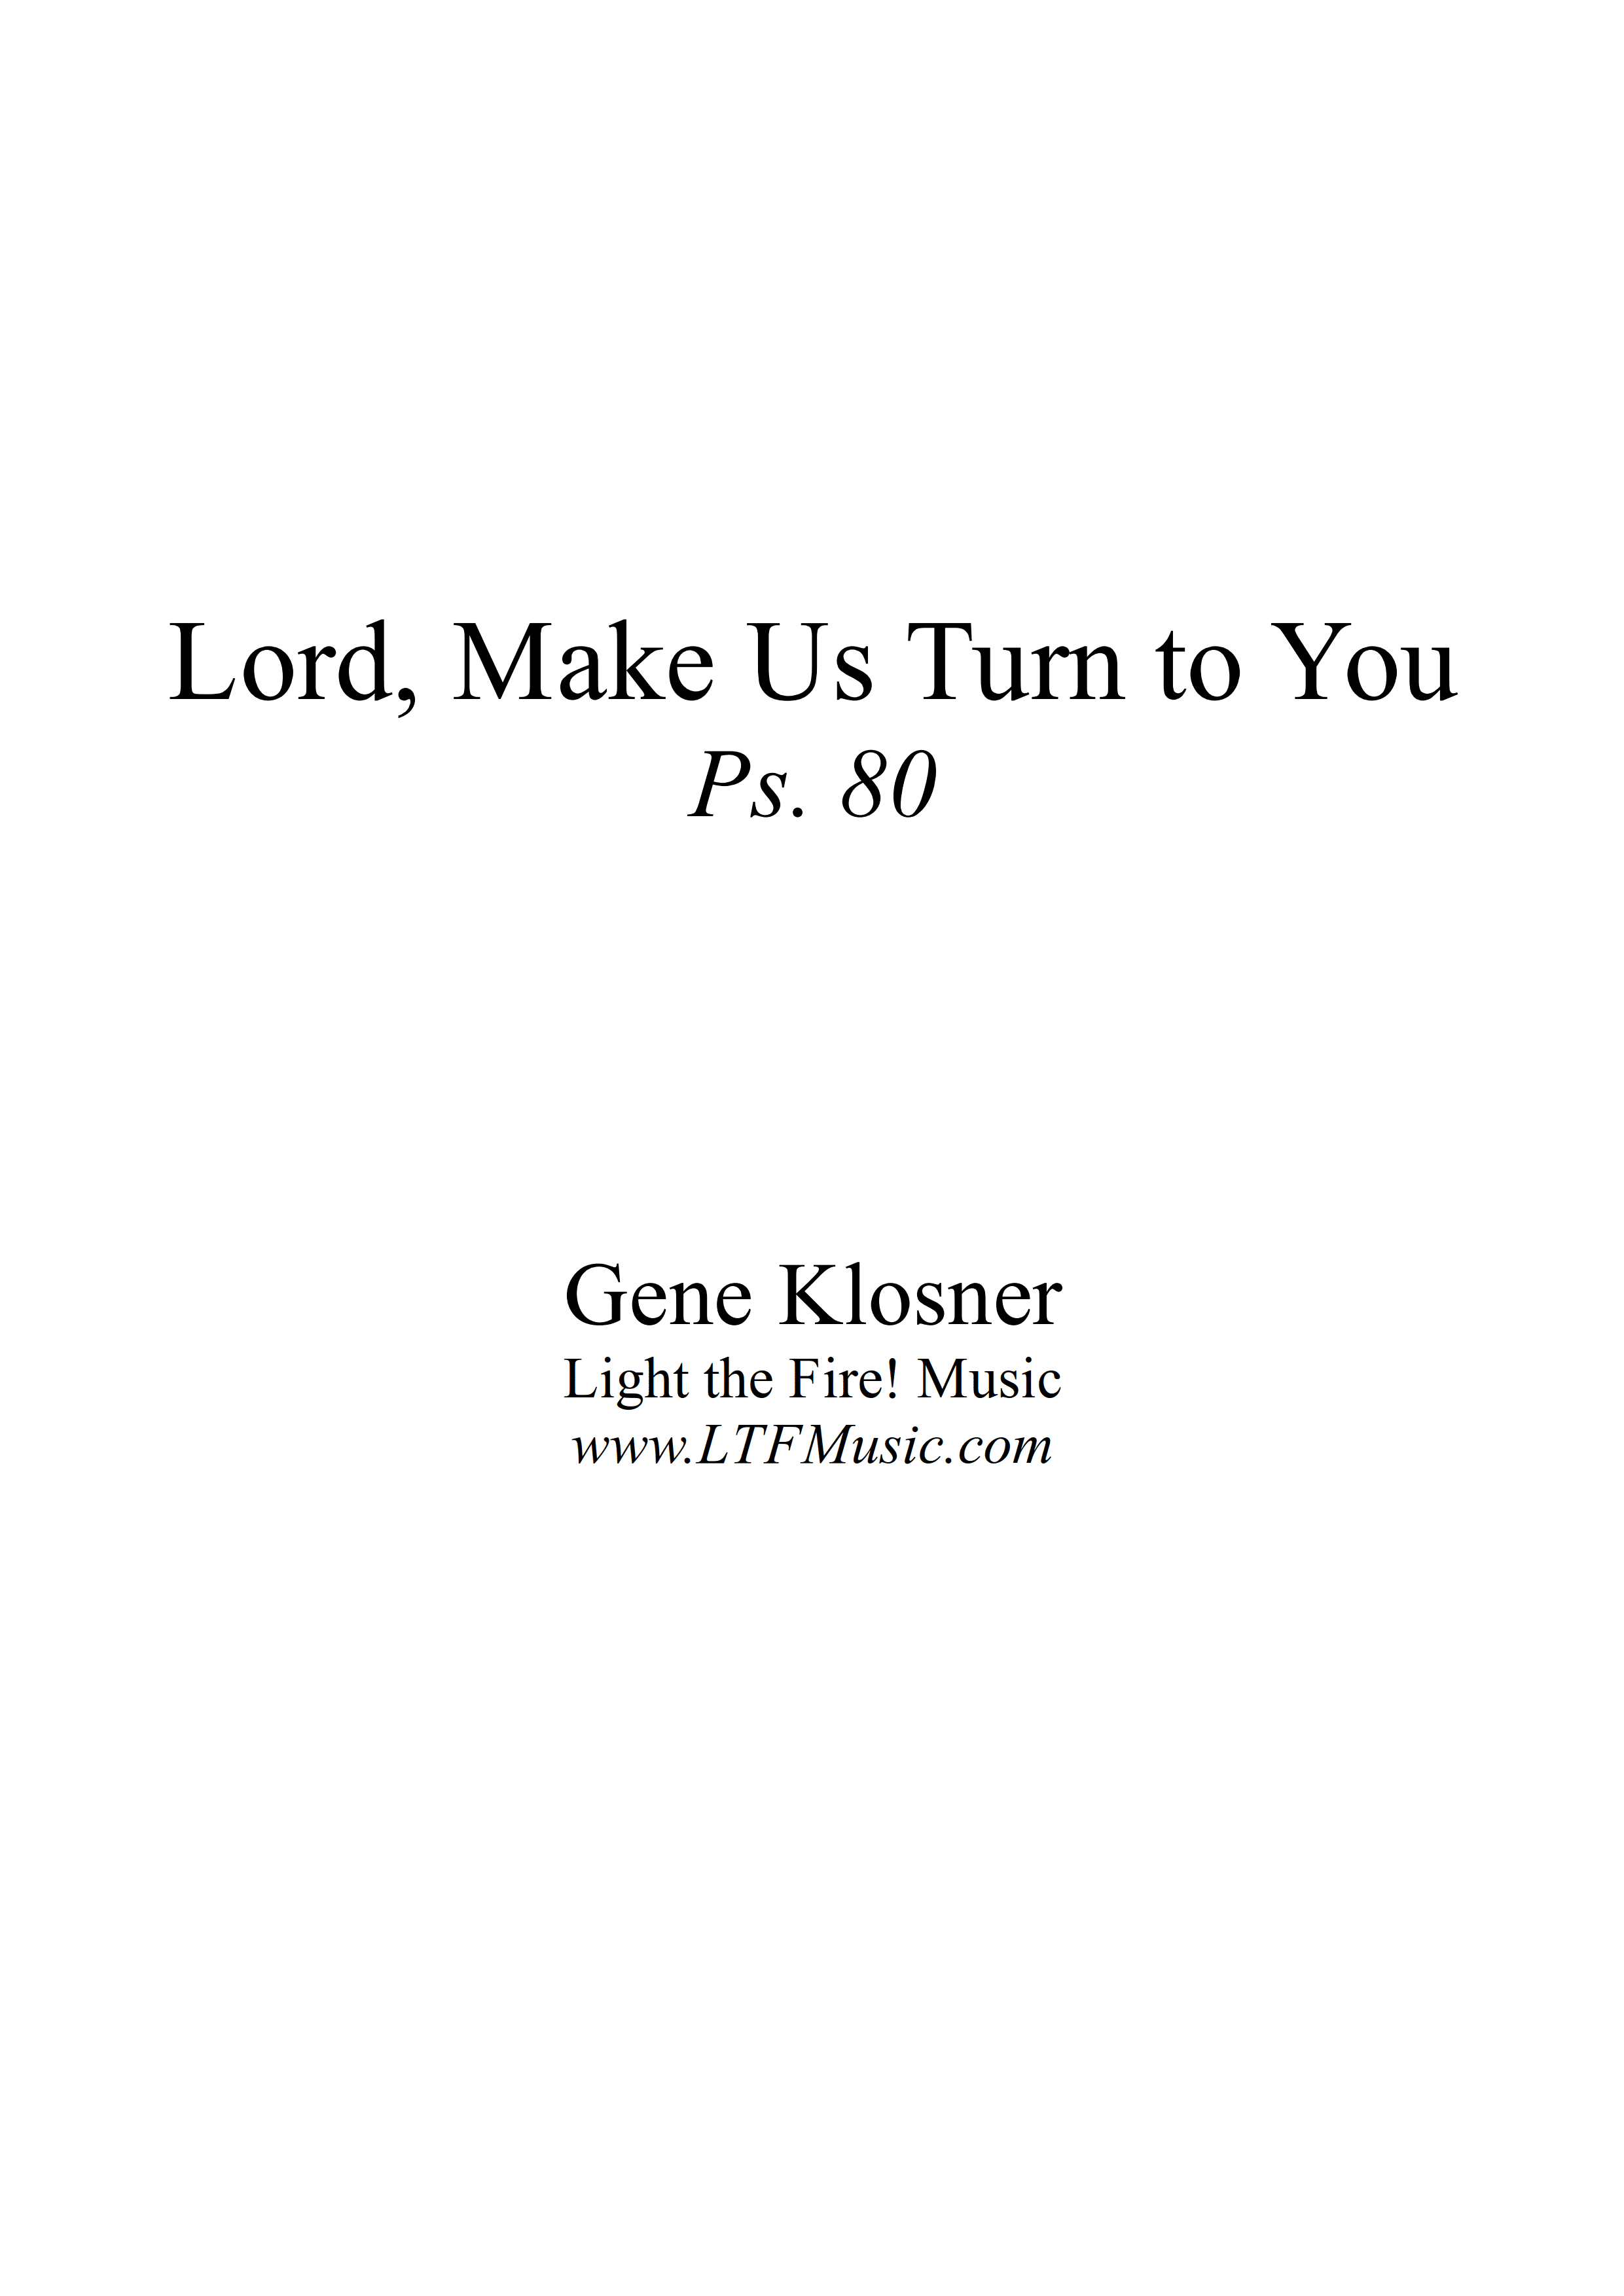 Psalm 80 – Lord, Make Us Turn to You (Klosner)